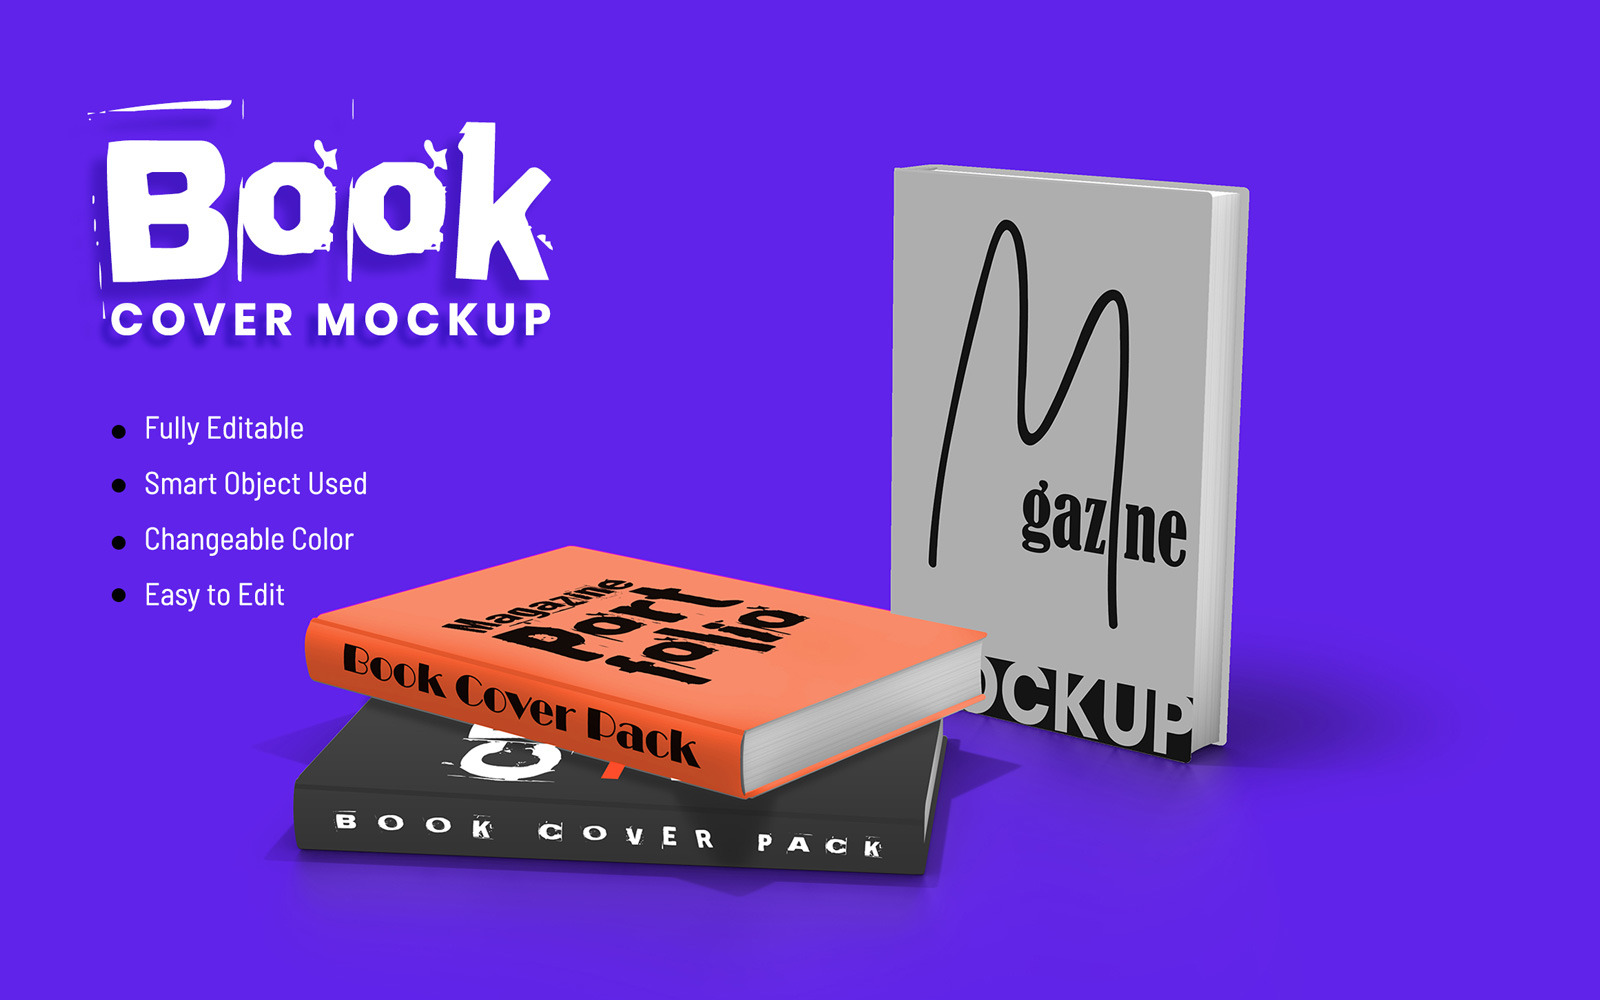 Book Cover product mockup #121851 - TemplateMonster